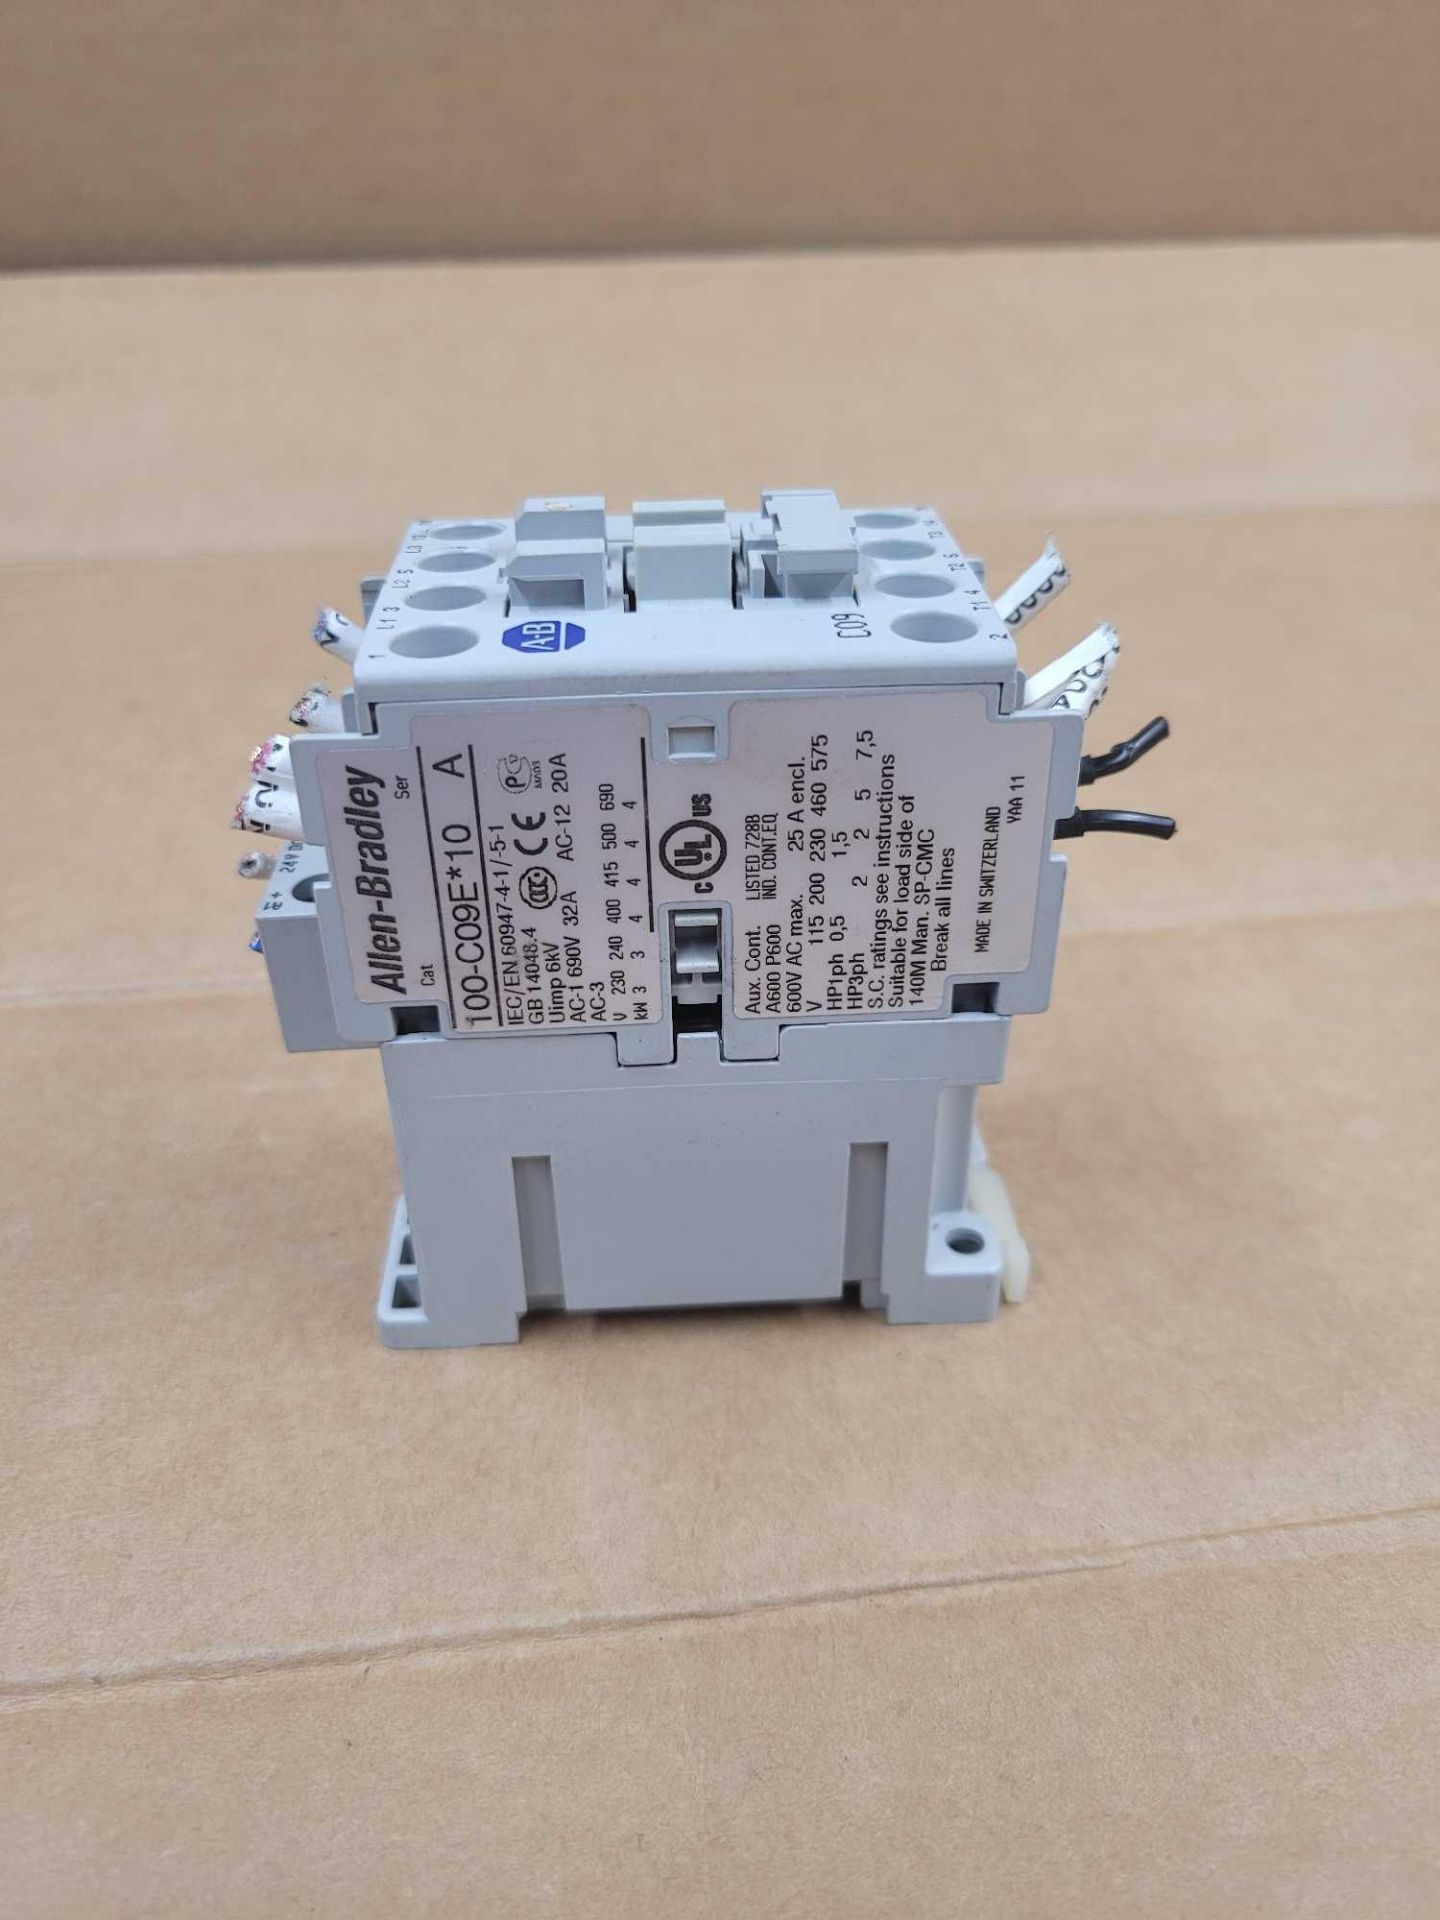 LOT OF 5 ALLEN BRADLEY 100-C09E*10 / Series A Contactor  /  Lot Weight: 4.4 lbs - Image 4 of 9